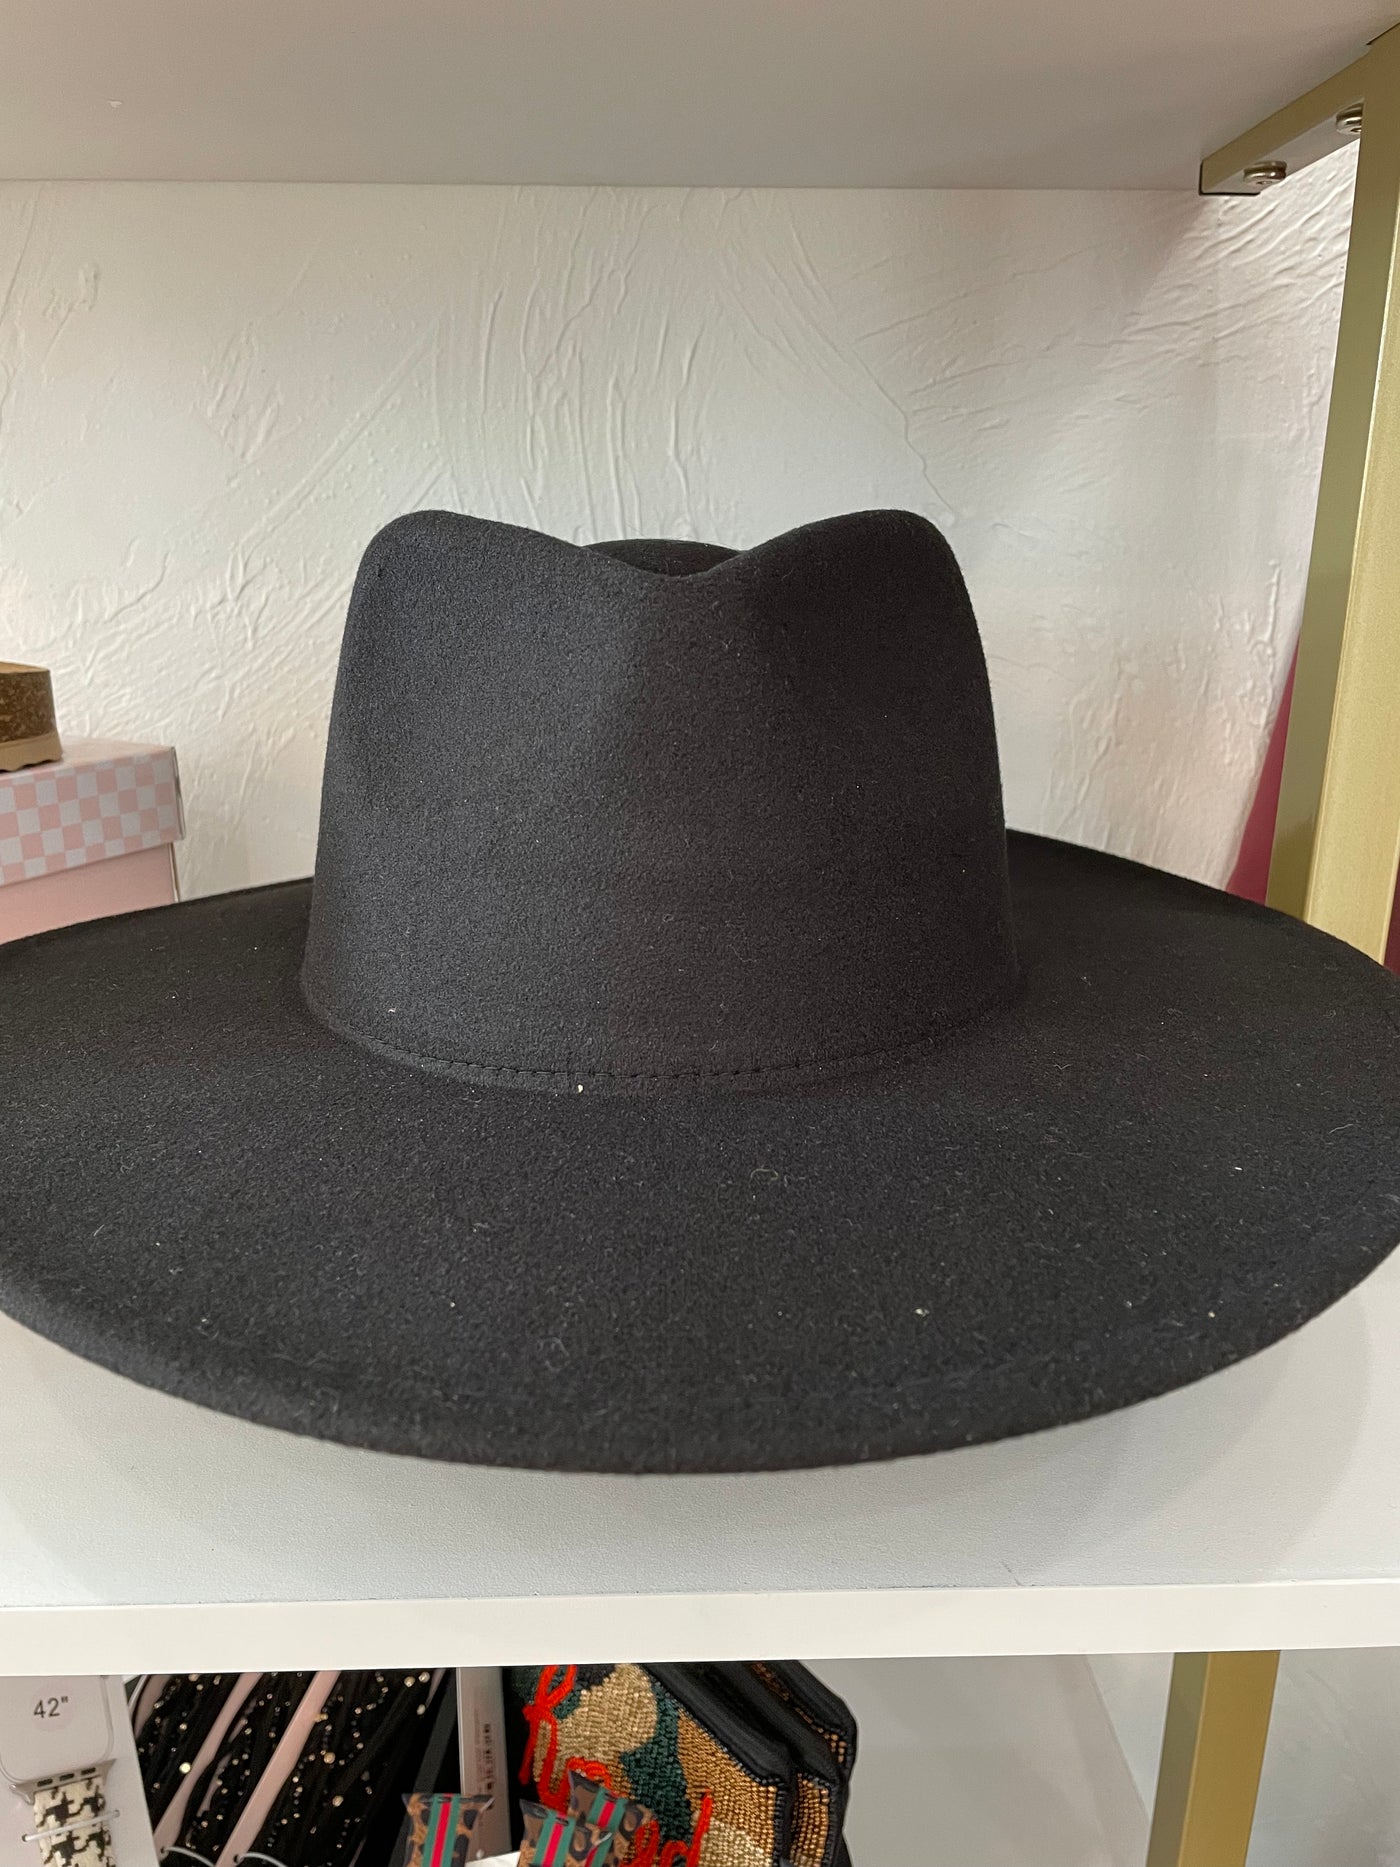 Vegan rancher fedora style black hat. Fits larger heads too. 